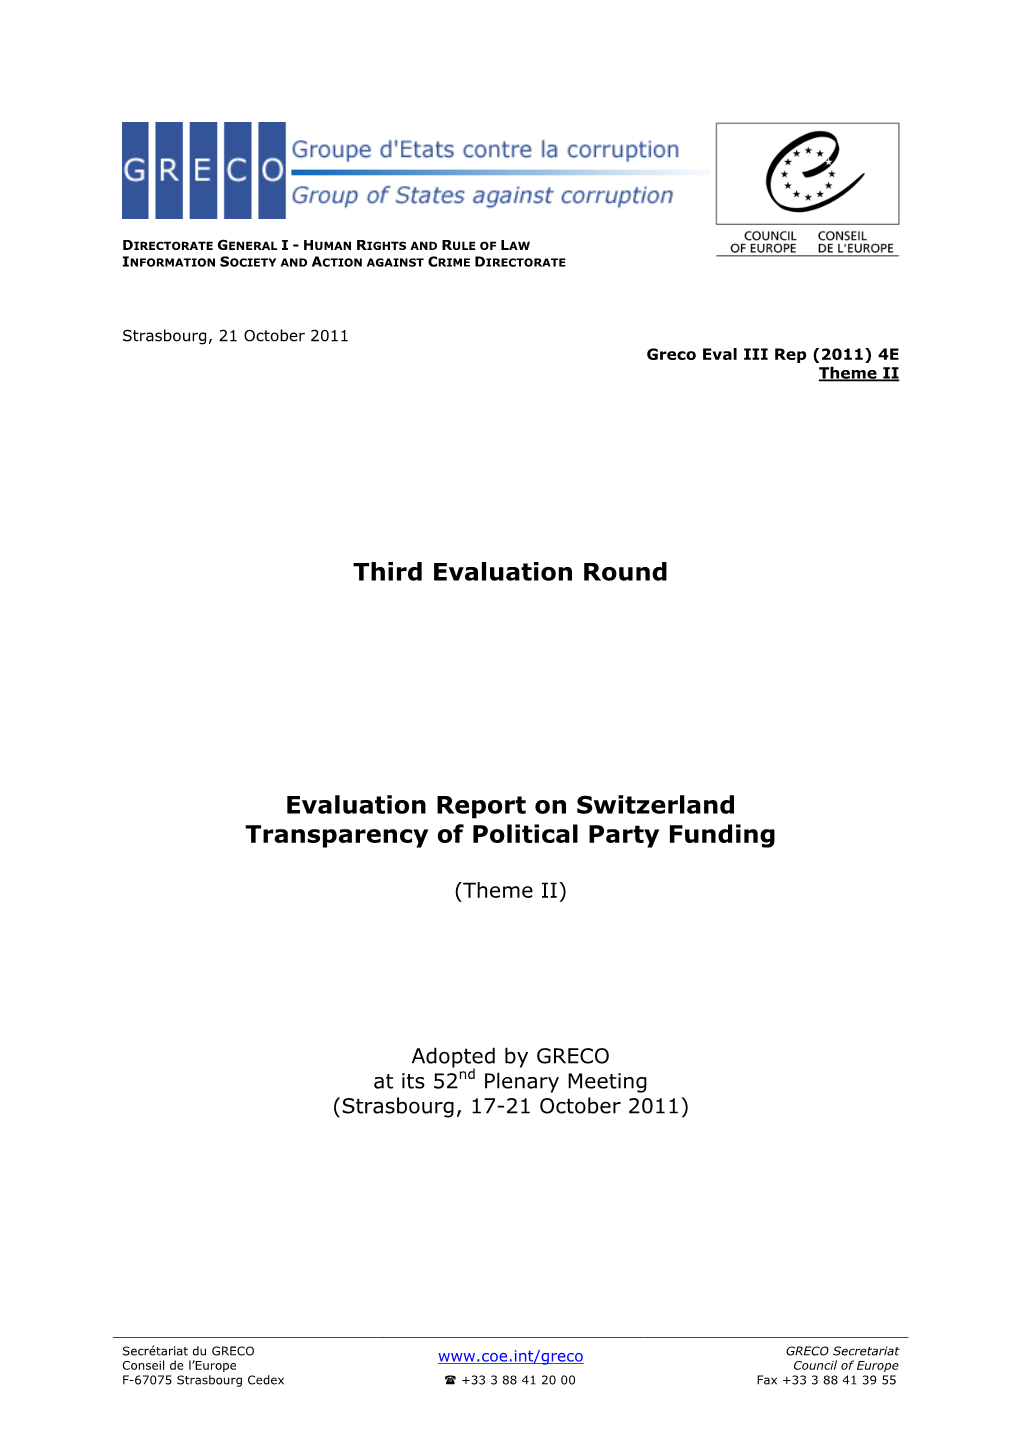 (Transparency of Political Party Funding), Adopted by GRECO At